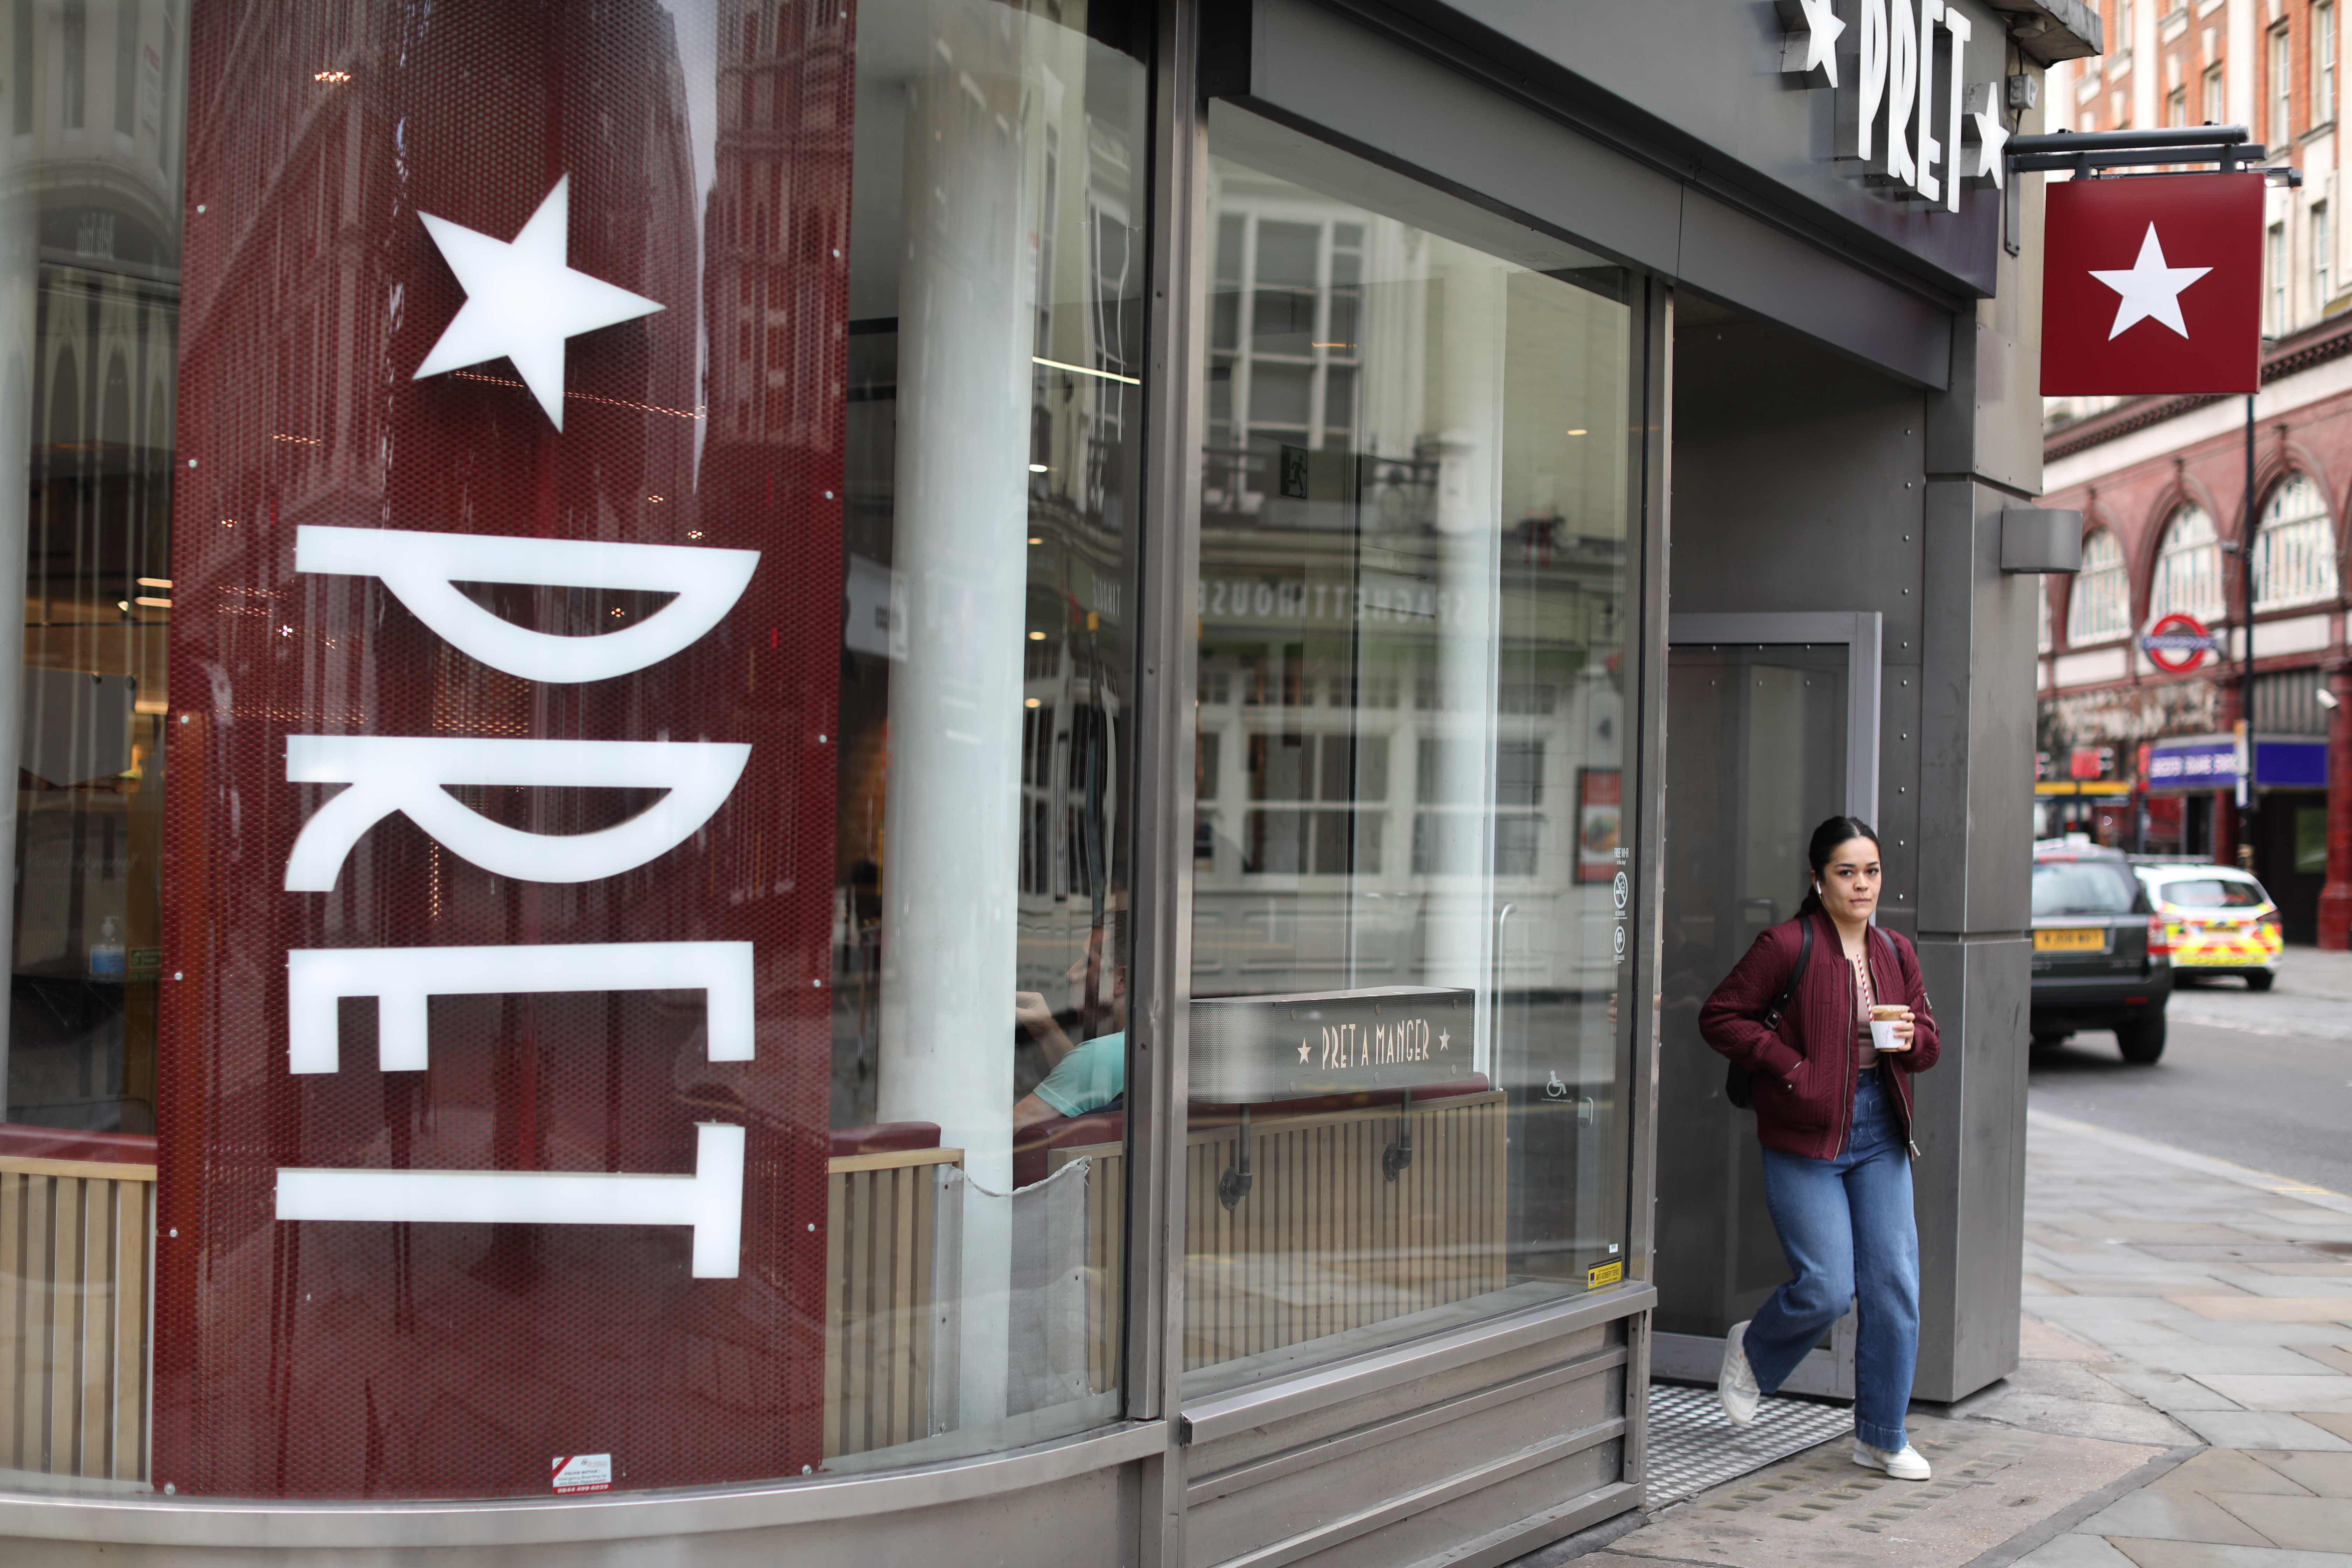 ‘Every week, Pret a Manger tells Bloomberg how their food and drink sales are going at different locations’